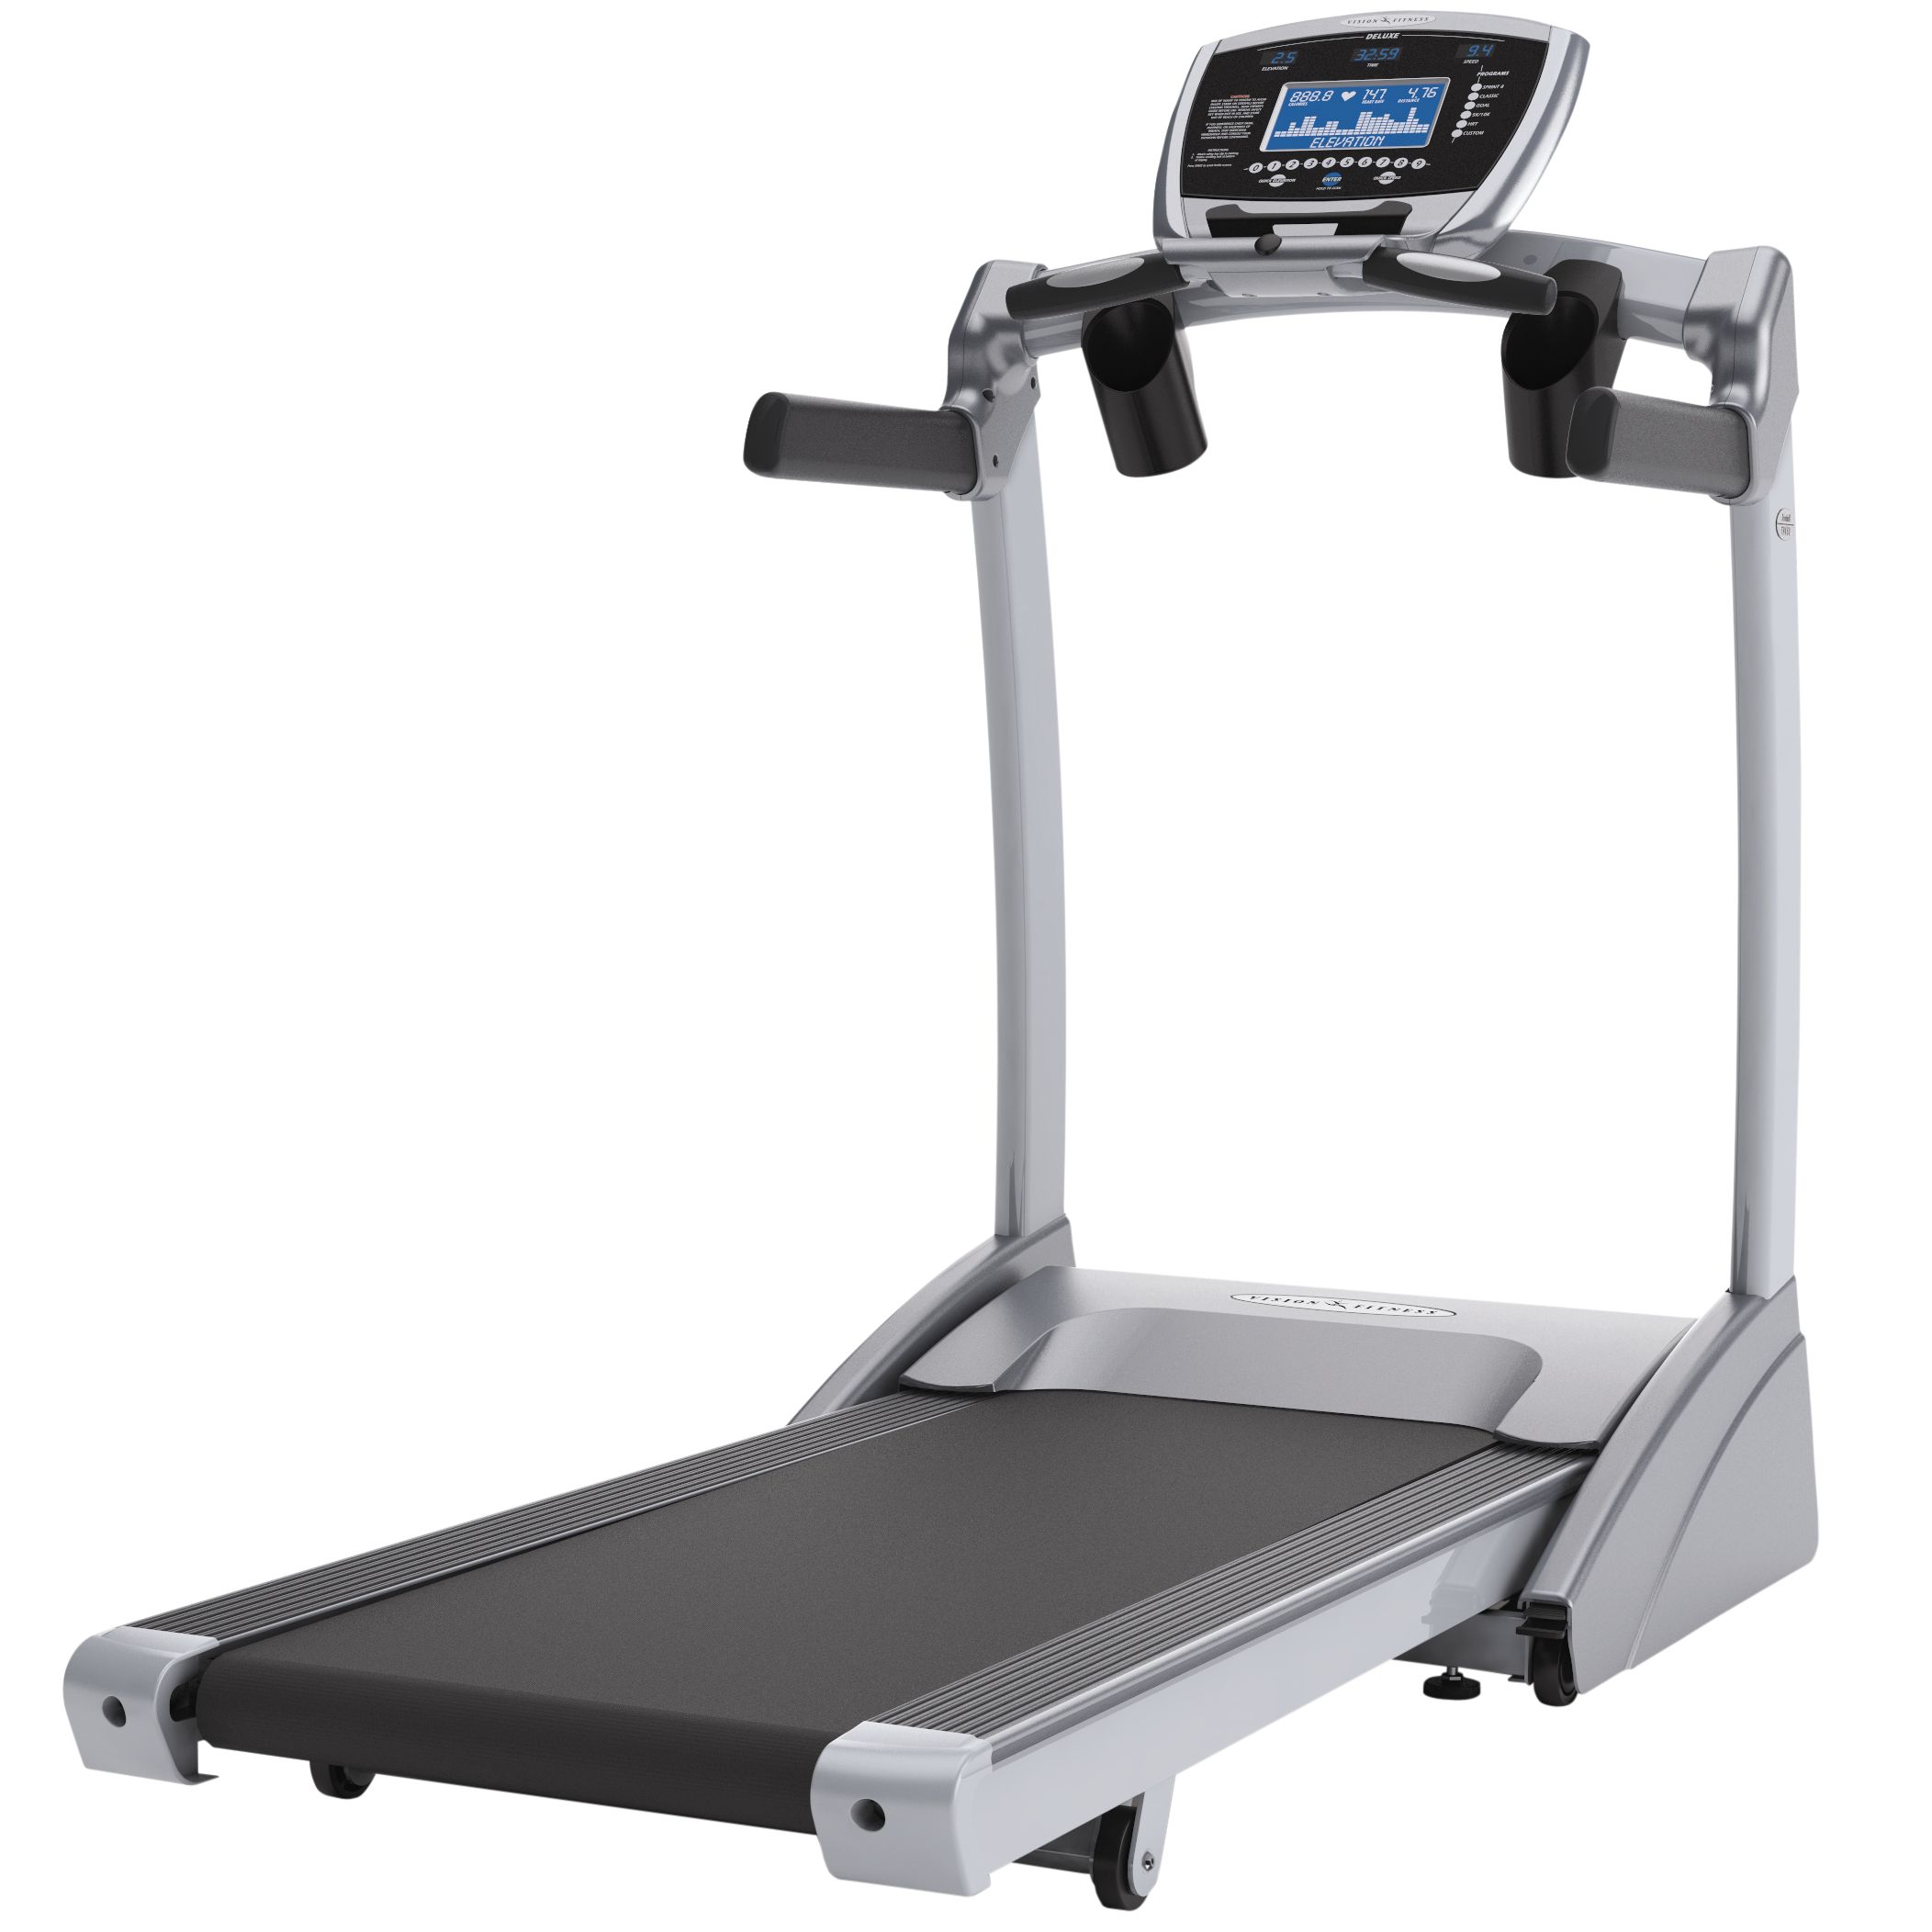 Vision Fitness T9550HRT Folding Treadmill with Premier Console at John Lewis